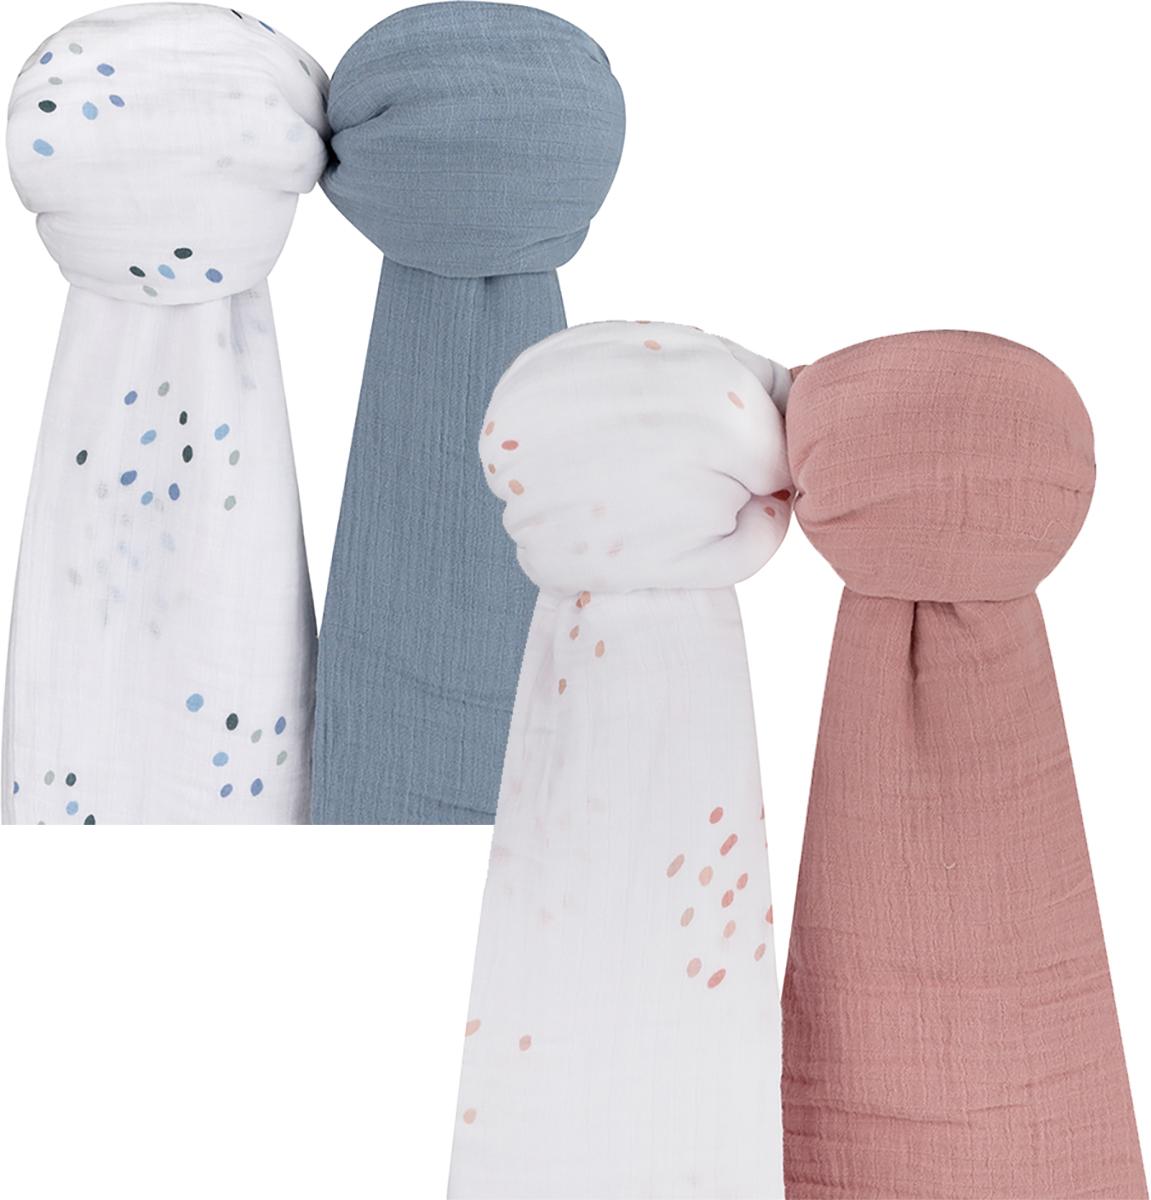 Ely's & Co Raindrops Muslin Swaddle 2 Pack